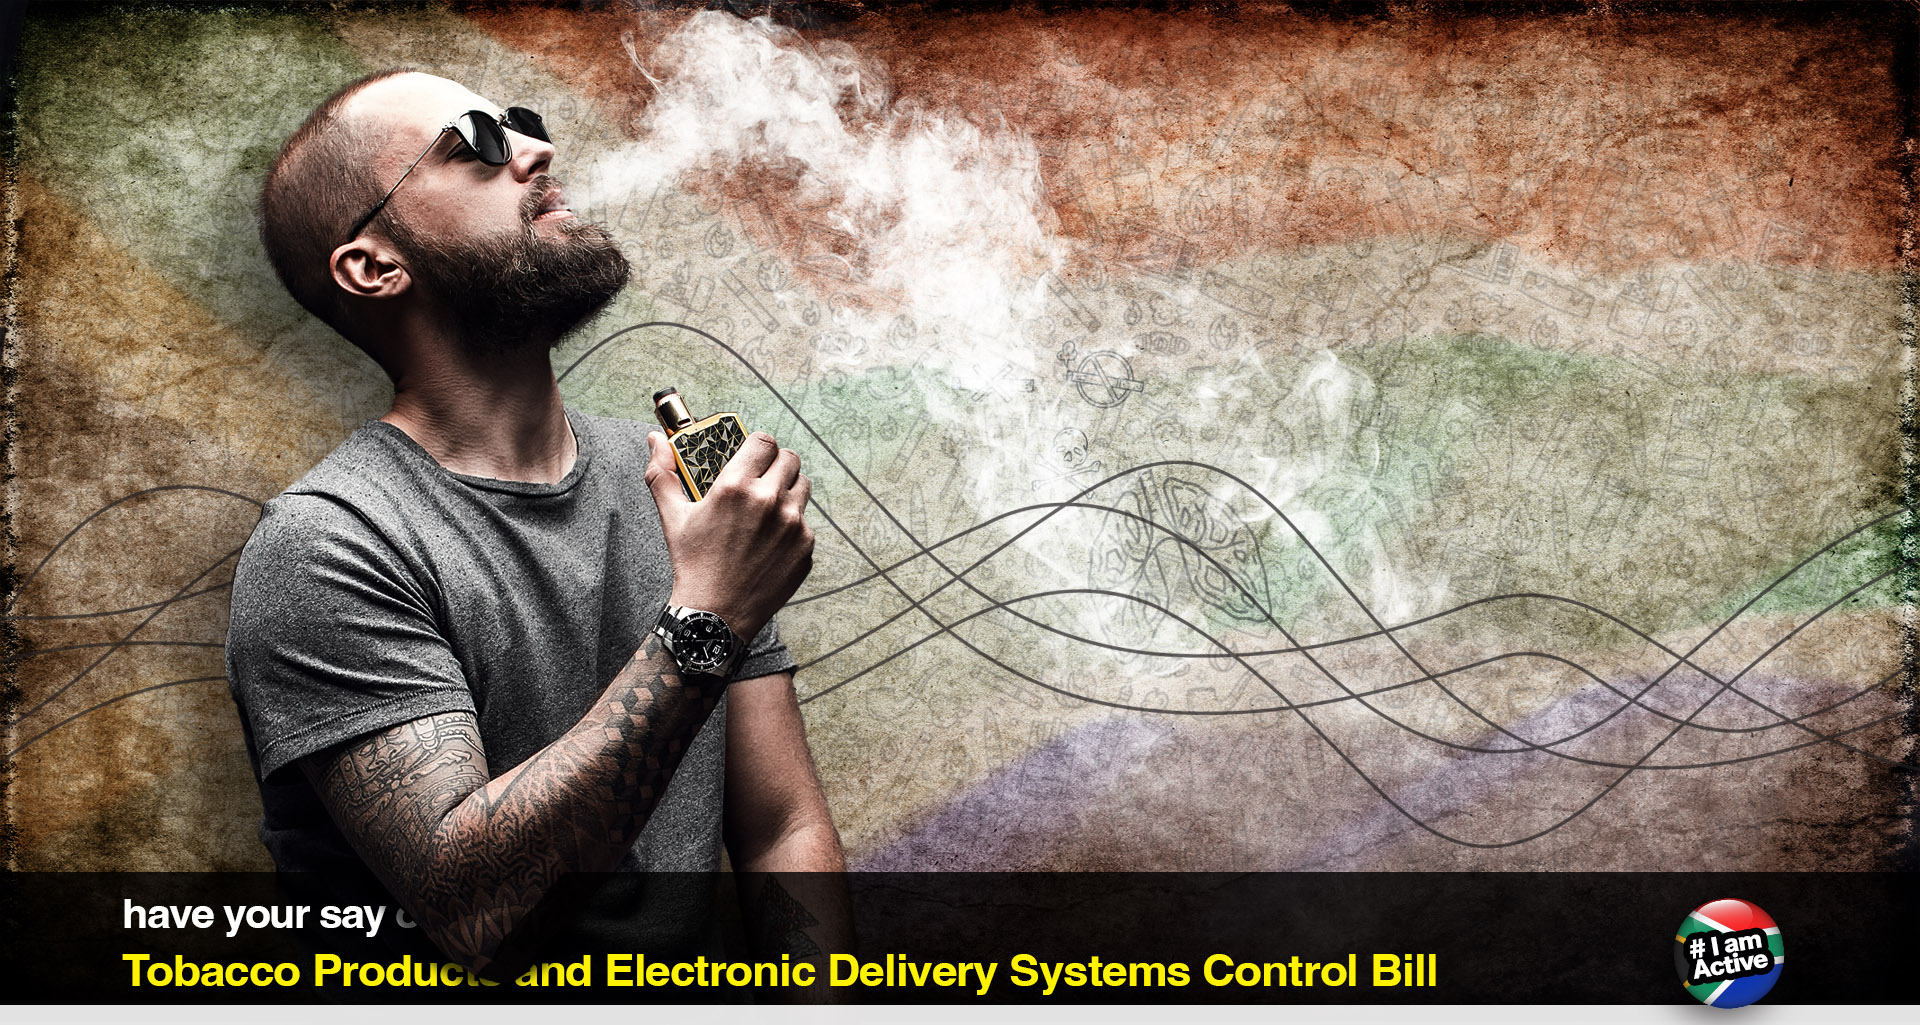 Have your say on the Tobacco Products and Electronic Delivery Systems Control Bill